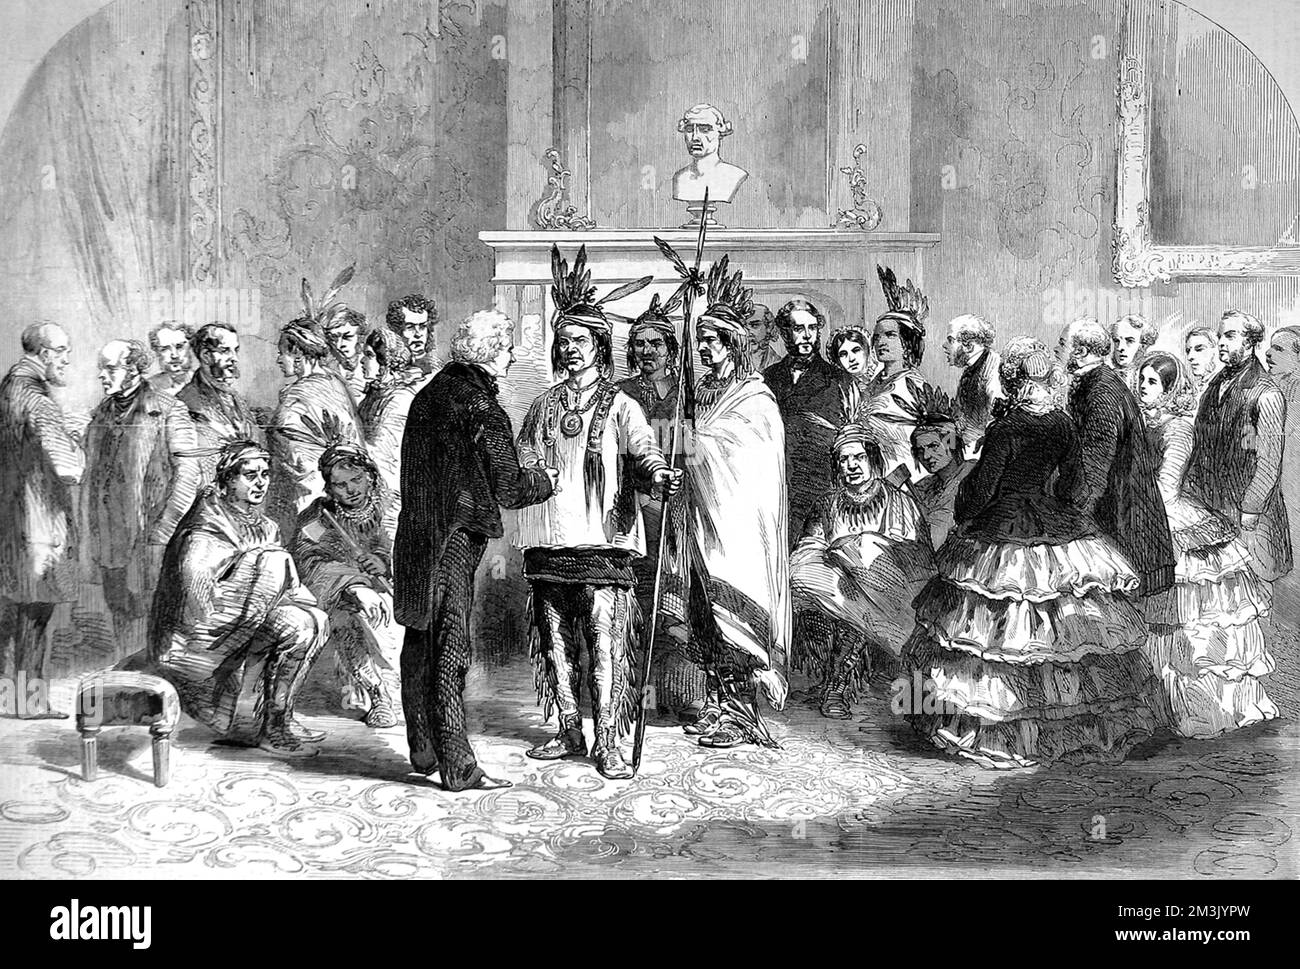 The President of the United States, James Buchanan, welcoming warring factions of American Indians into the White House, 1858. Representatives of the Pawnee and Poncas tribes were induced to shake hands by Buchanan. Stock Photo